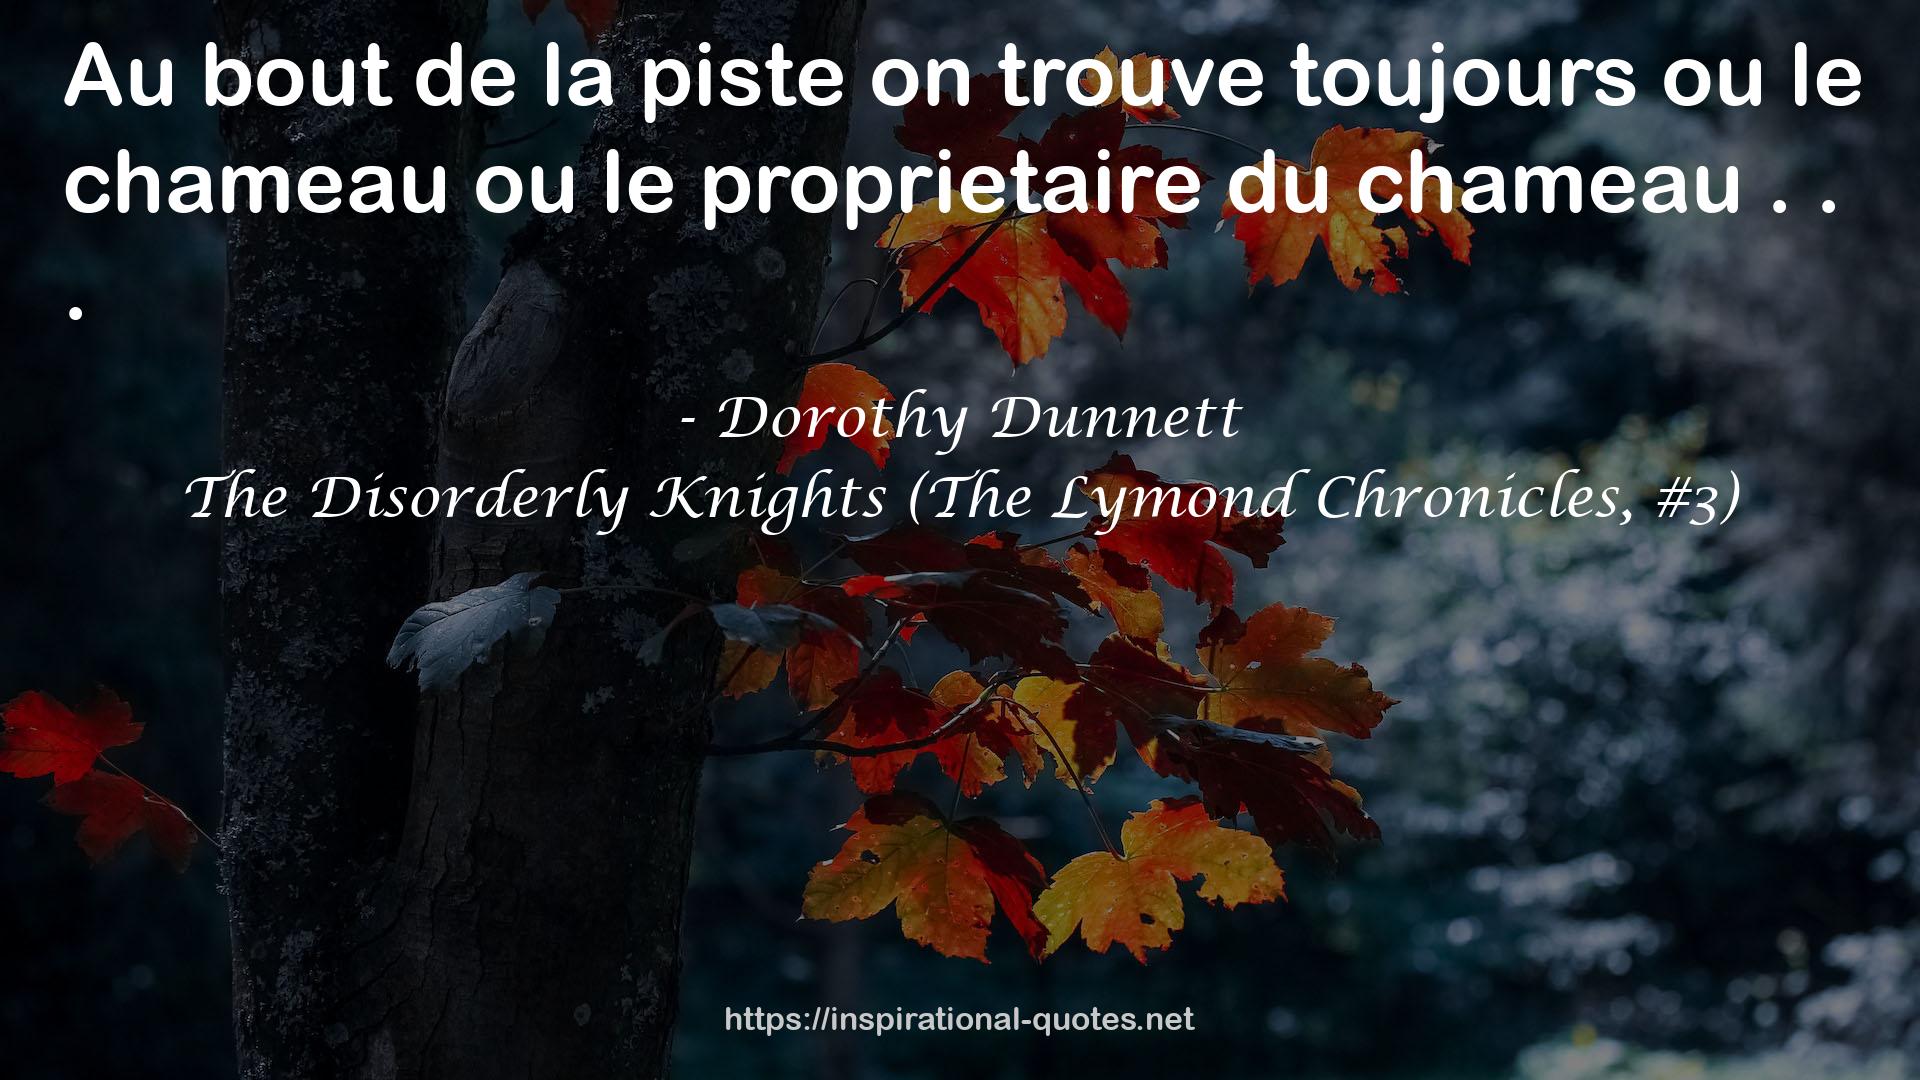 The Disorderly Knights (The Lymond Chronicles, #3) QUOTES